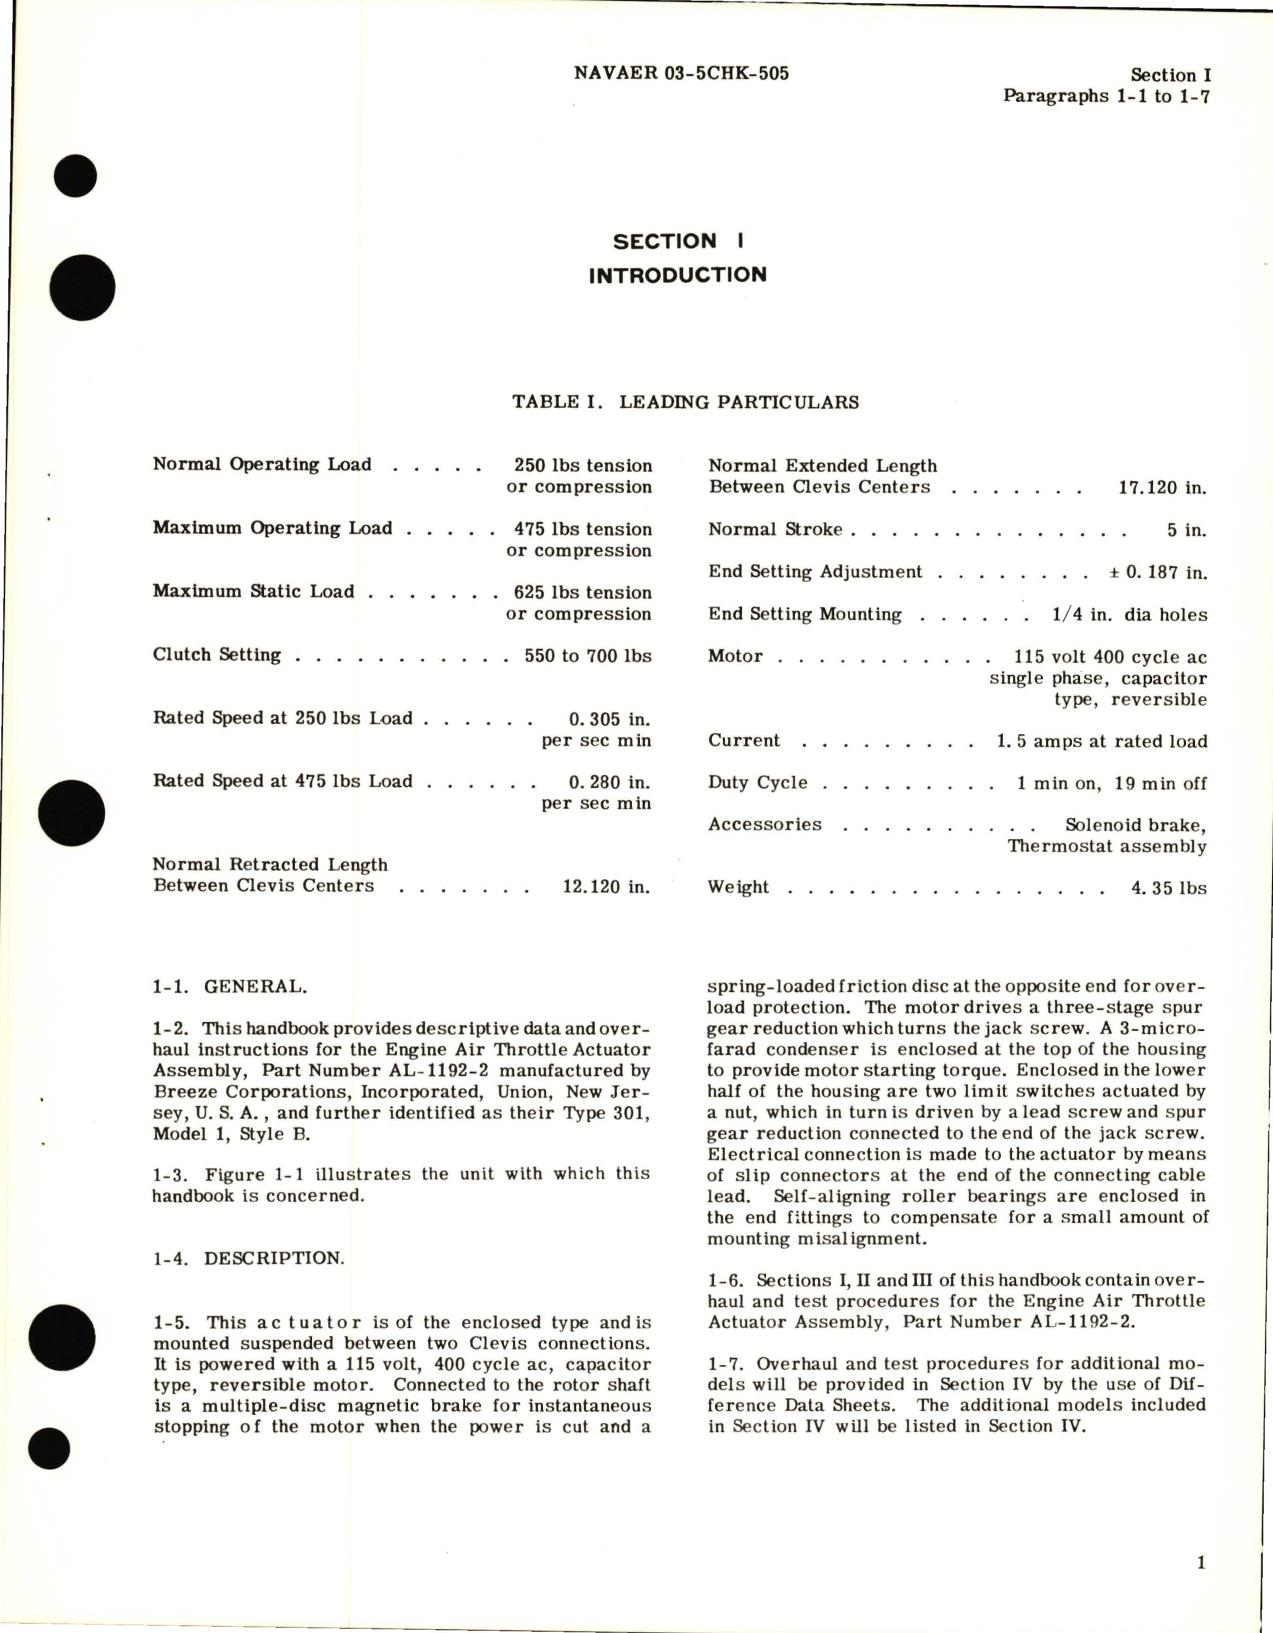 Sample page 5 from AirCorps Library document: Overhaul Instructions for Actuator Assembly Engine Air Throttle, Part No. AL-1192-2, Type 301-1-B